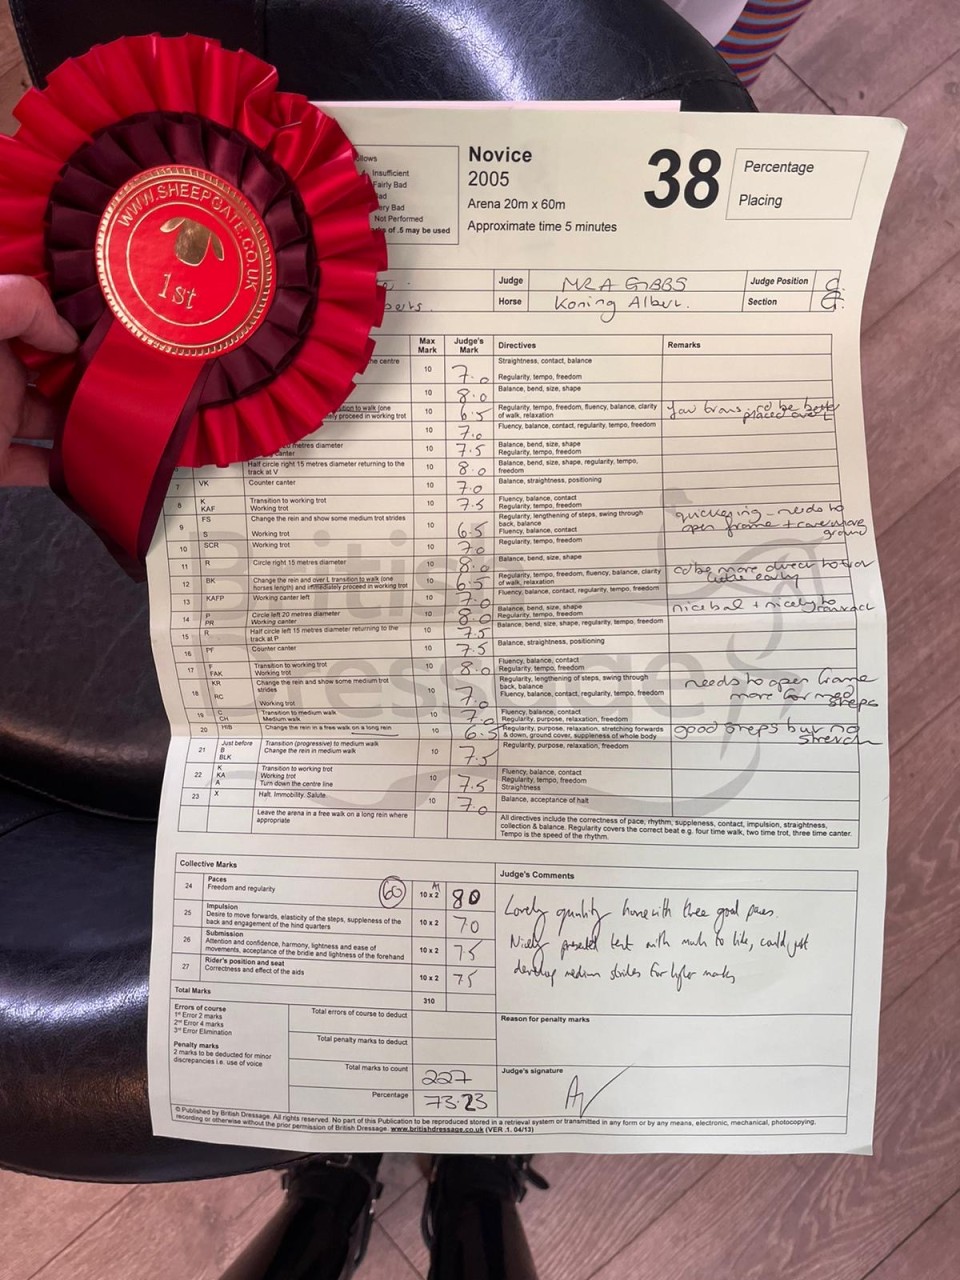 Qualifying scores and 2 wins at Dressage